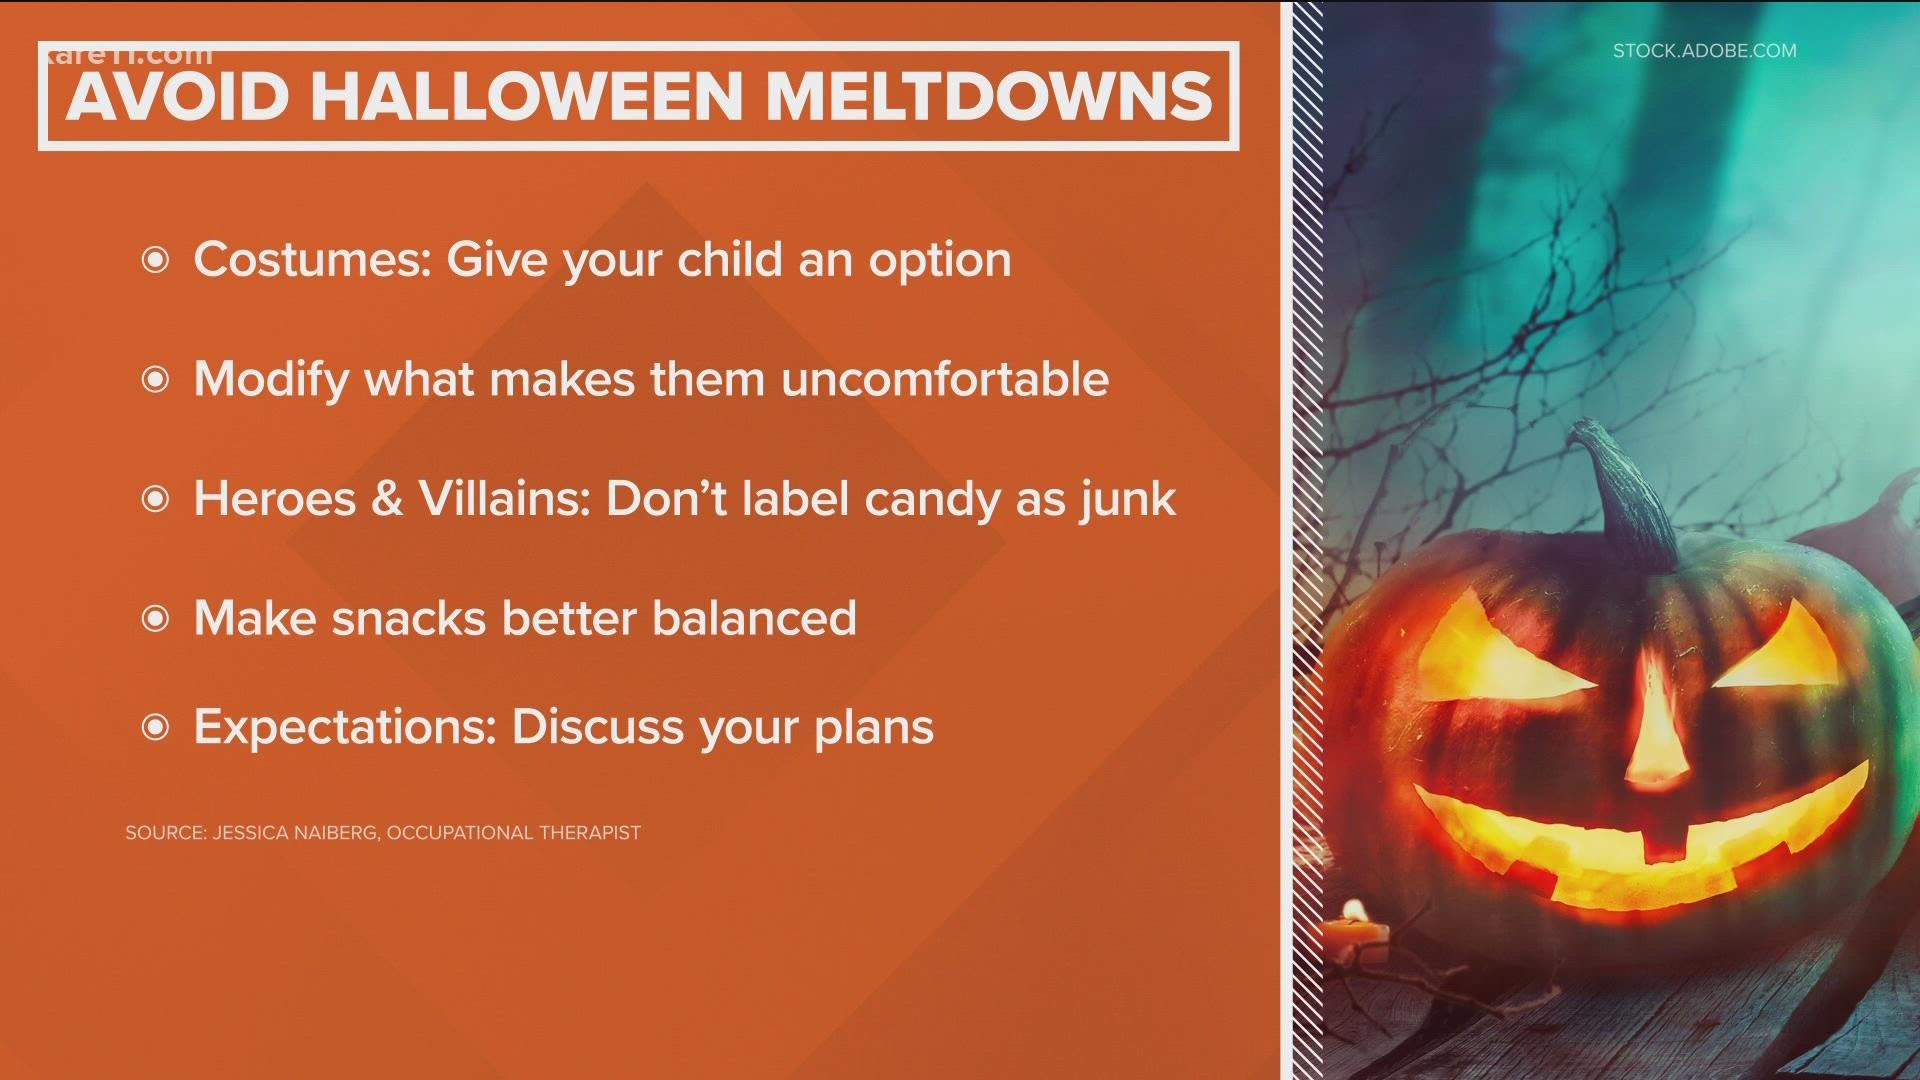 Kids will handle all the scares and fun a little better if there is a plan in place for the spooky night out.